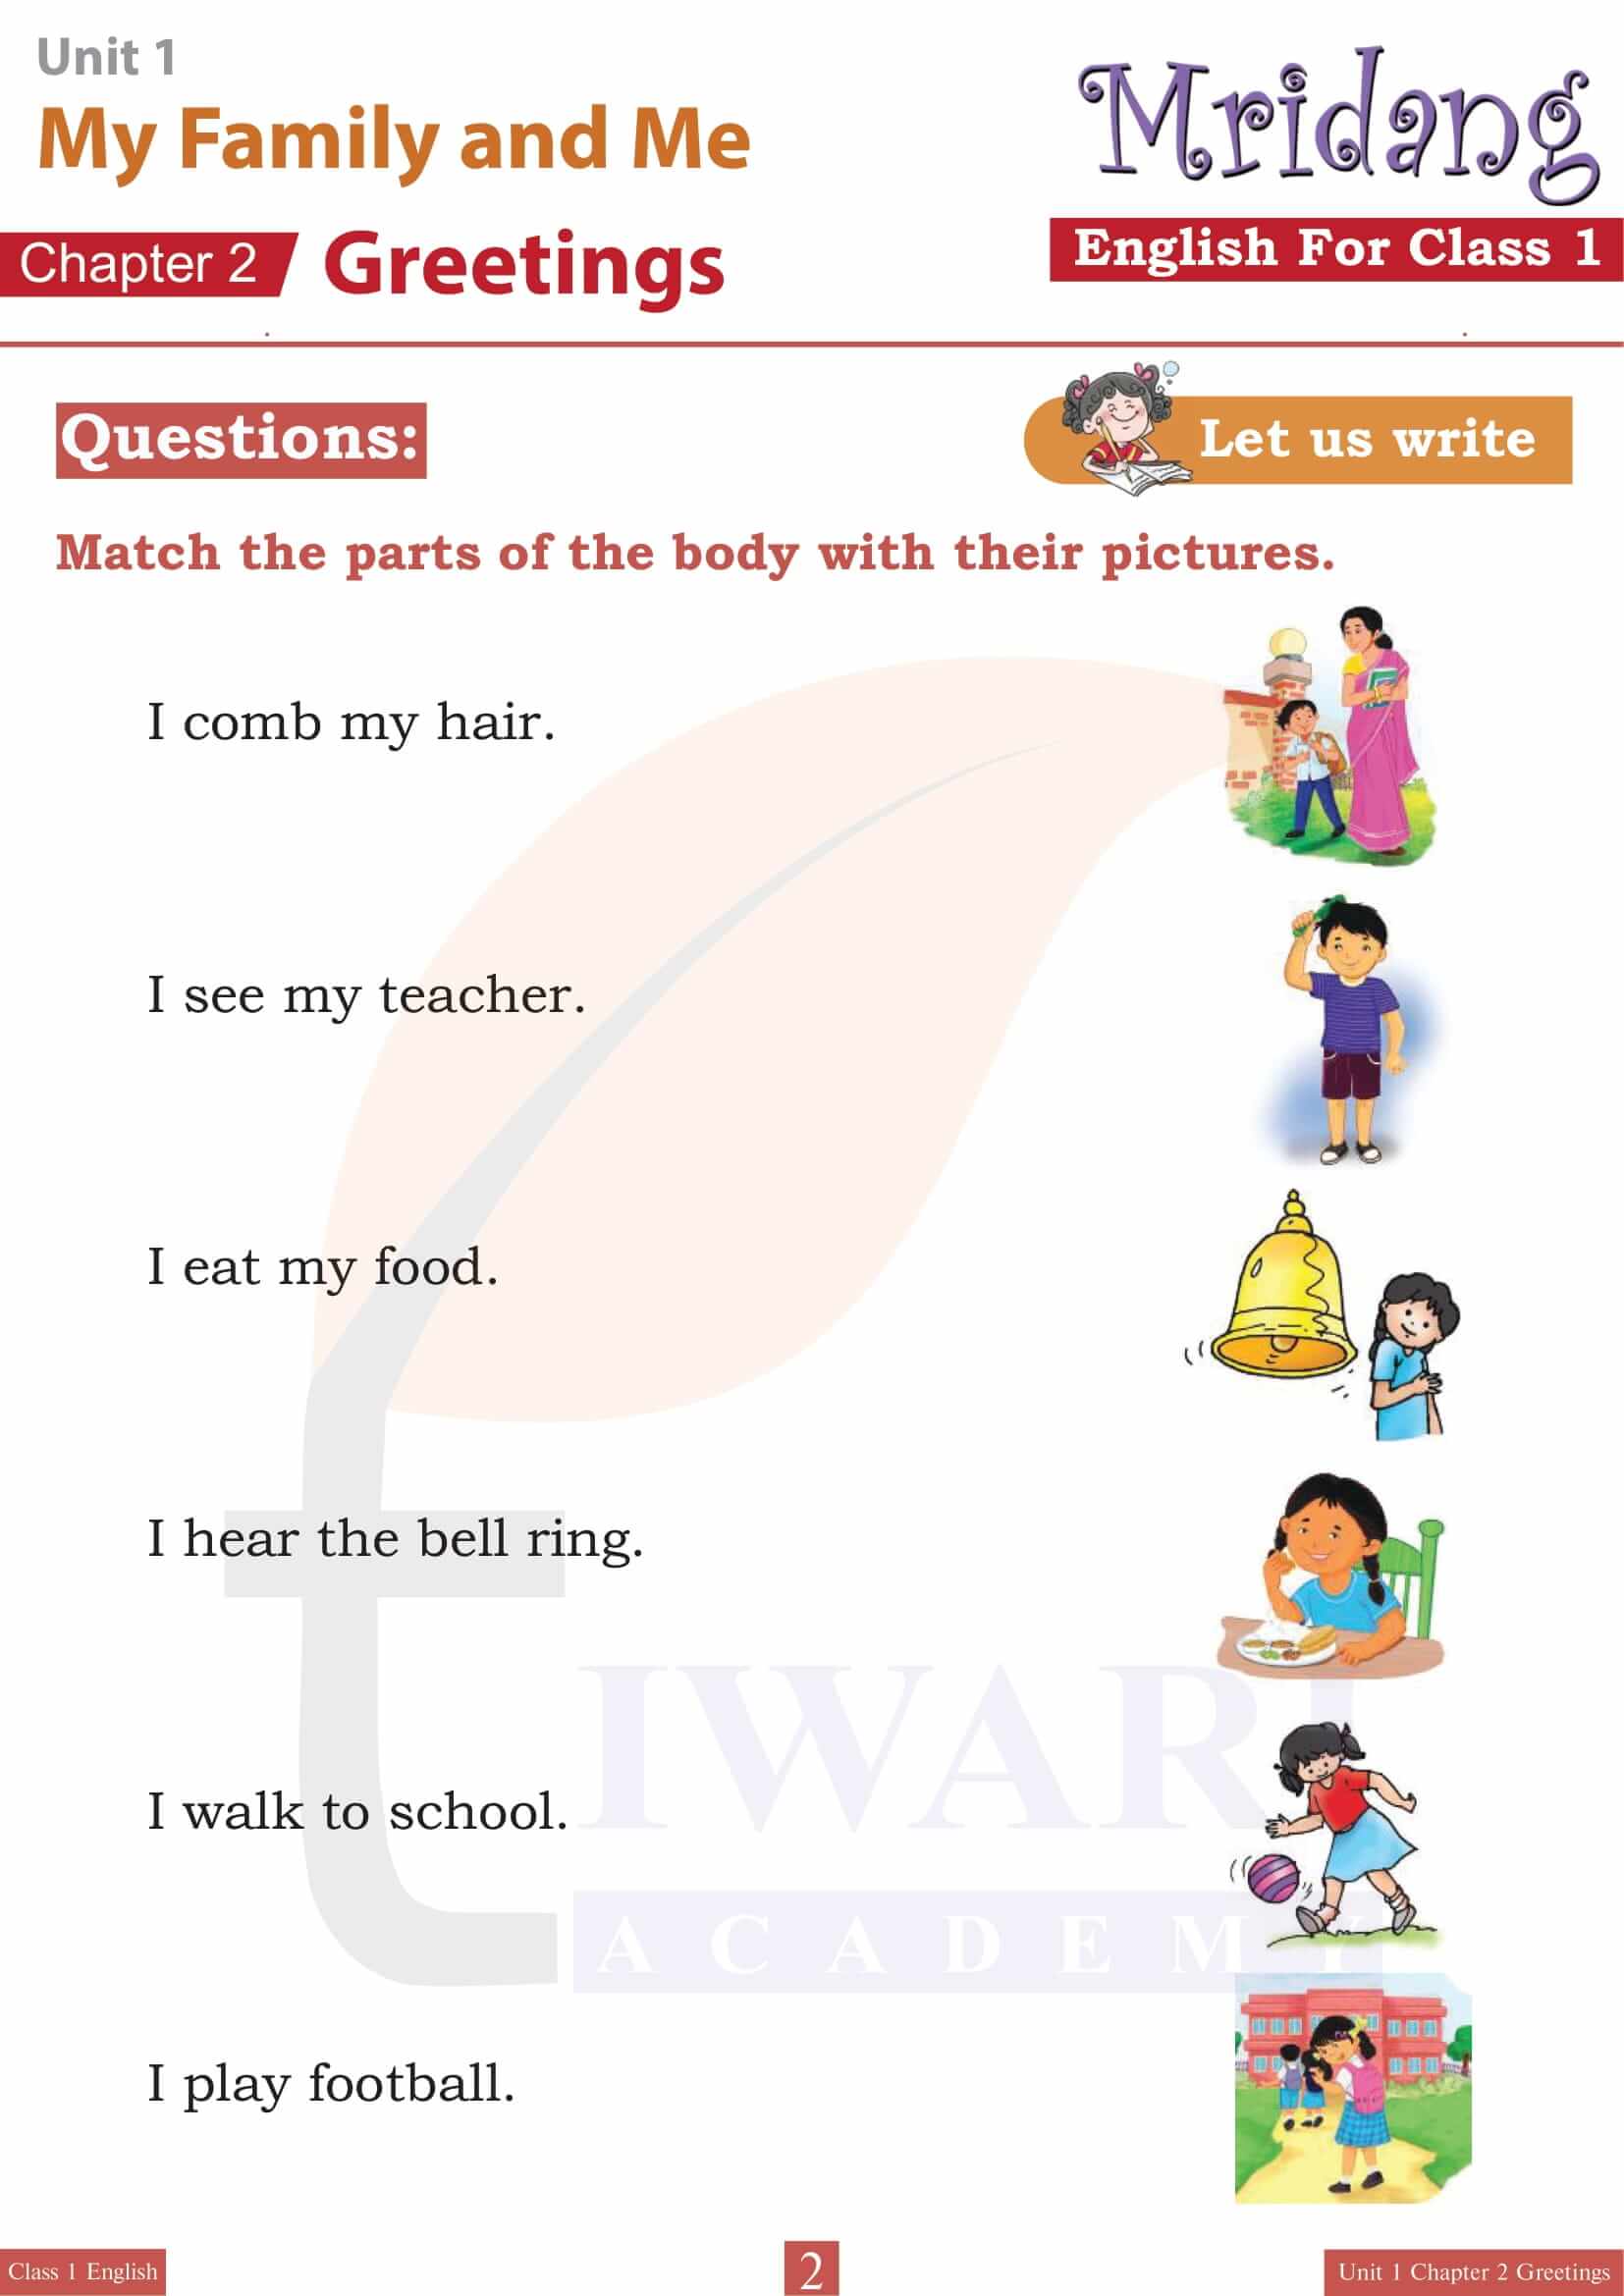 NCERT Solutions for Class 1 English Mridang Chapter 2 Greetings of Unit 1 My Family and Me Solutions